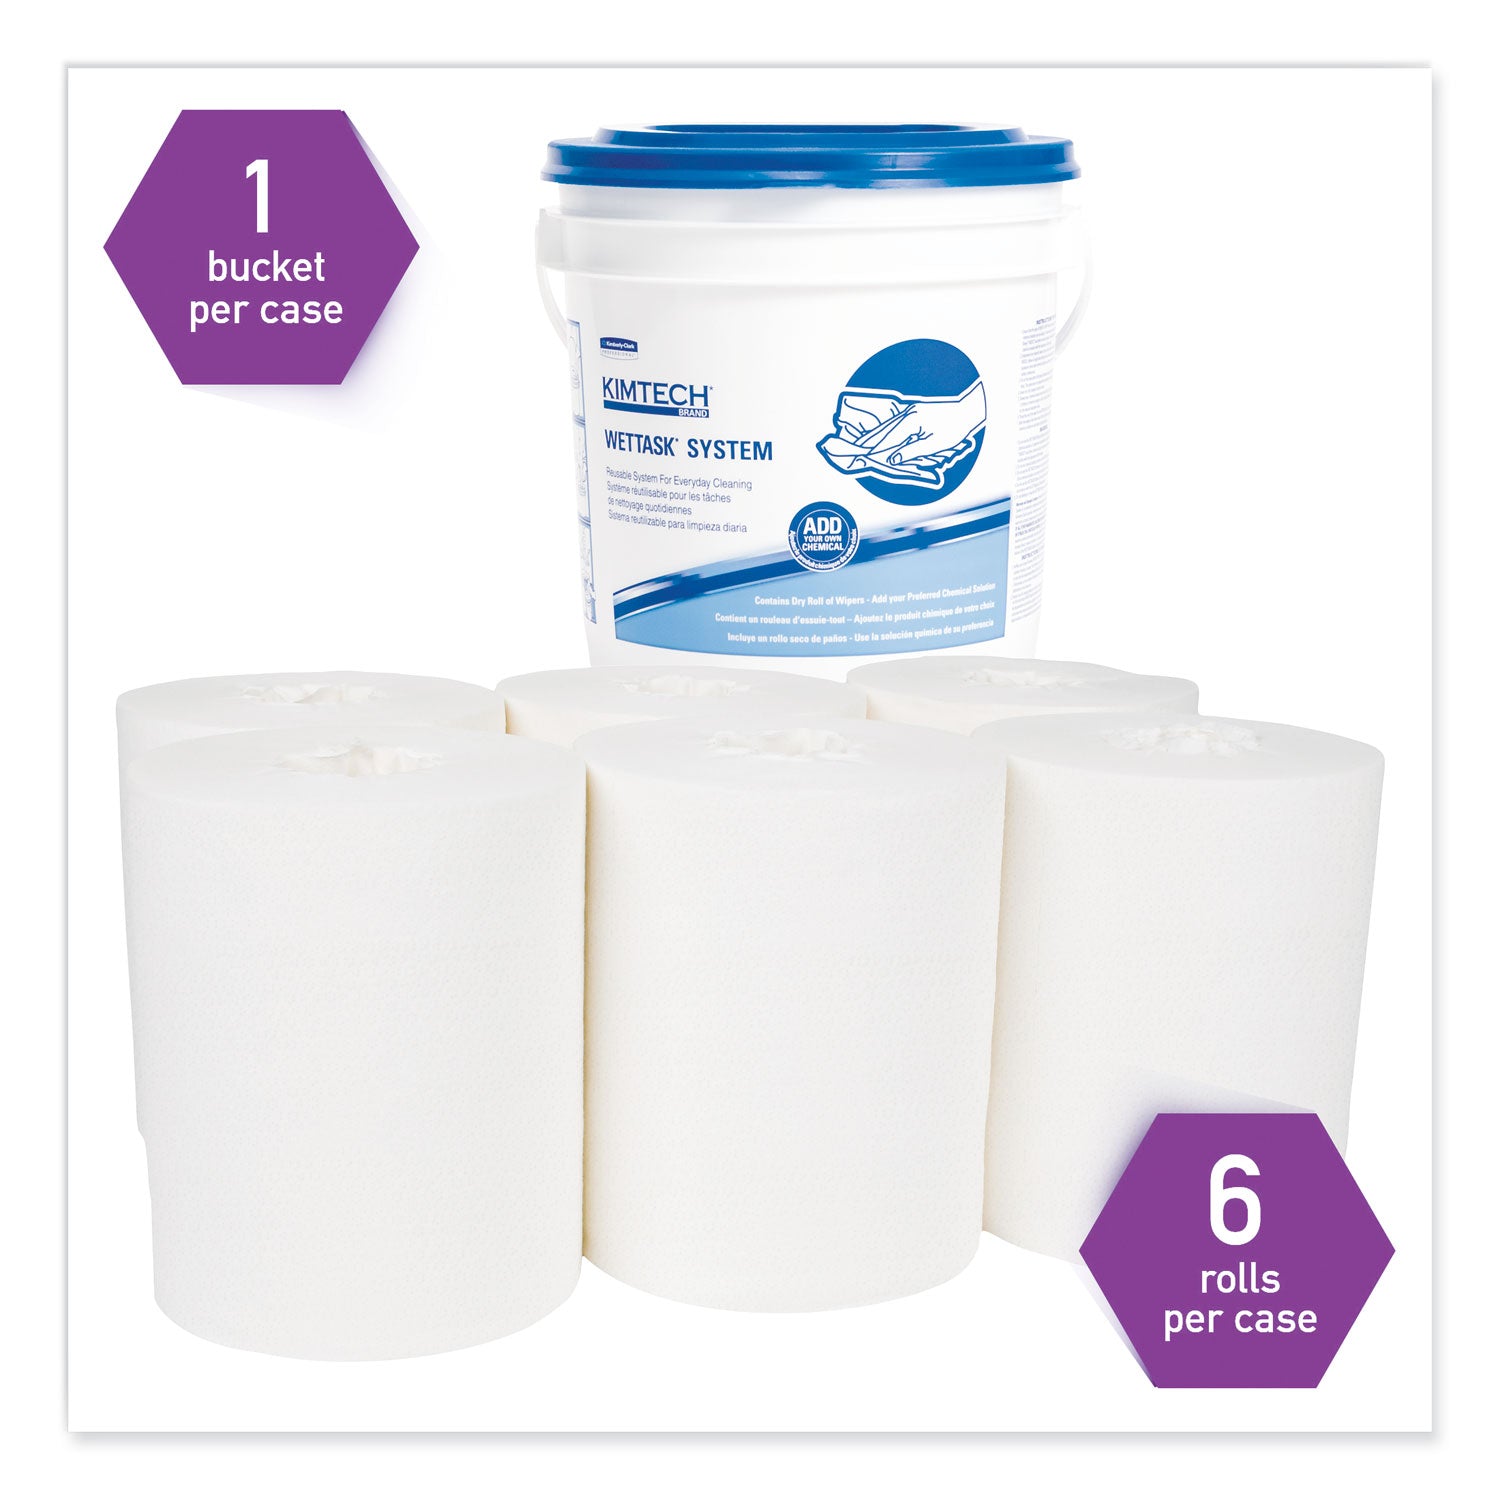 power-clean-wipers-for-disinfectants-sanitizerssolvents-wettask-customizable-wet-wipe-system-140-roll-6-rolls-1-bucket-ct_kcc0621102 - 2